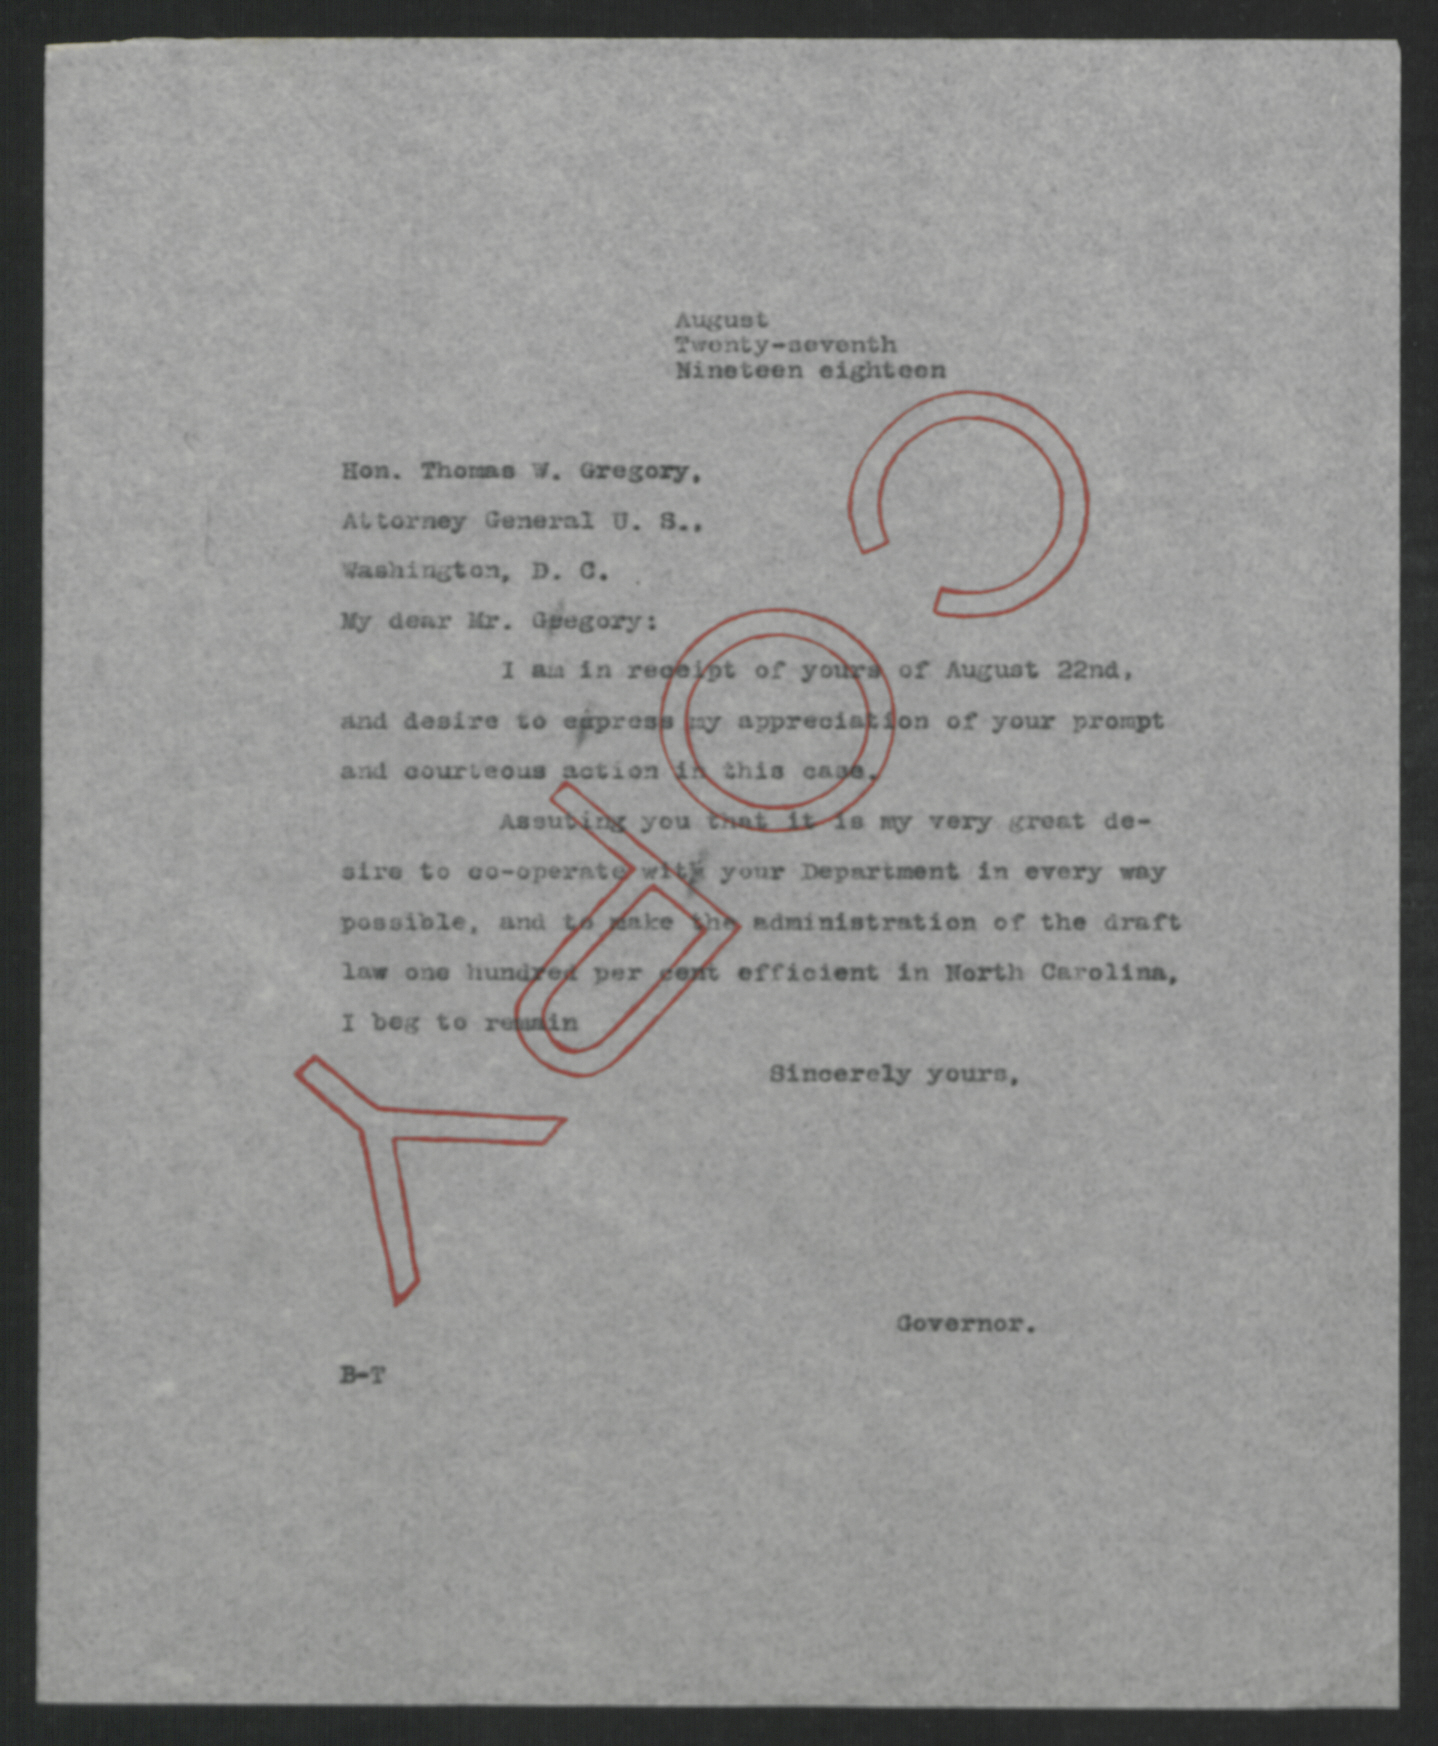 Letter from Thomas W. Bickett to Thomas W. Gregory, August 27, 1918